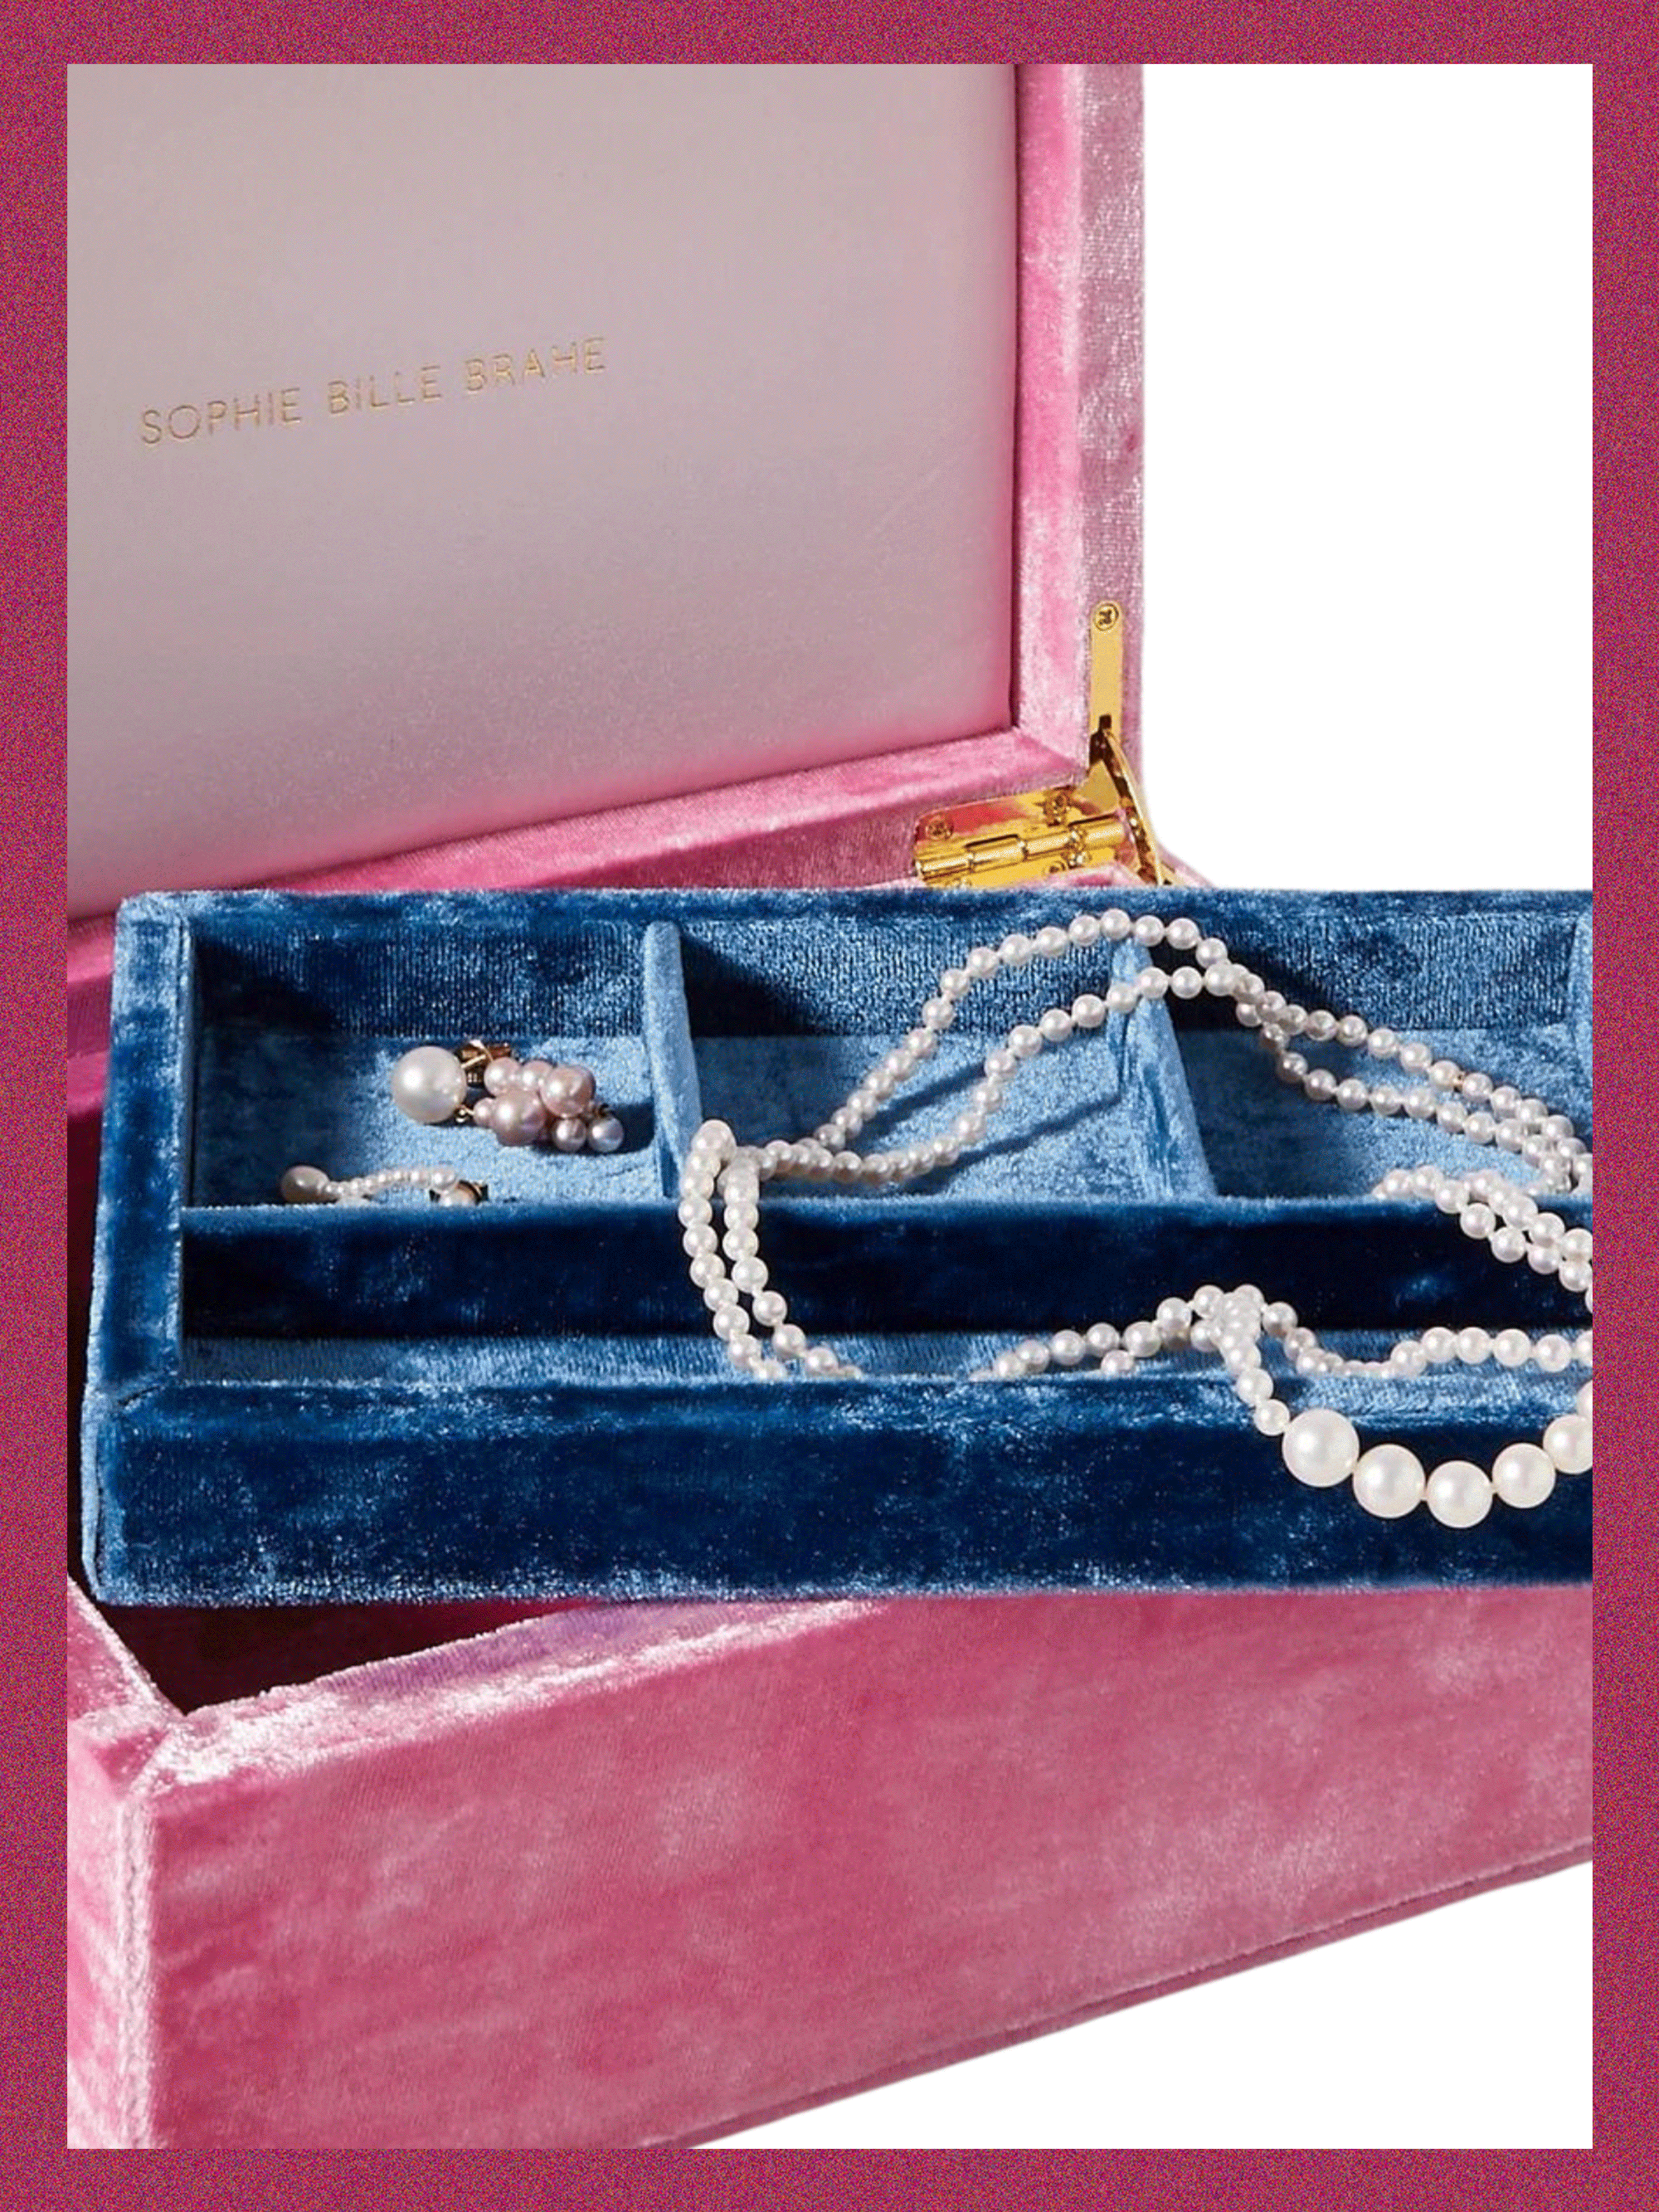 Luxury Necklace & Chain Box with Velvet Lining